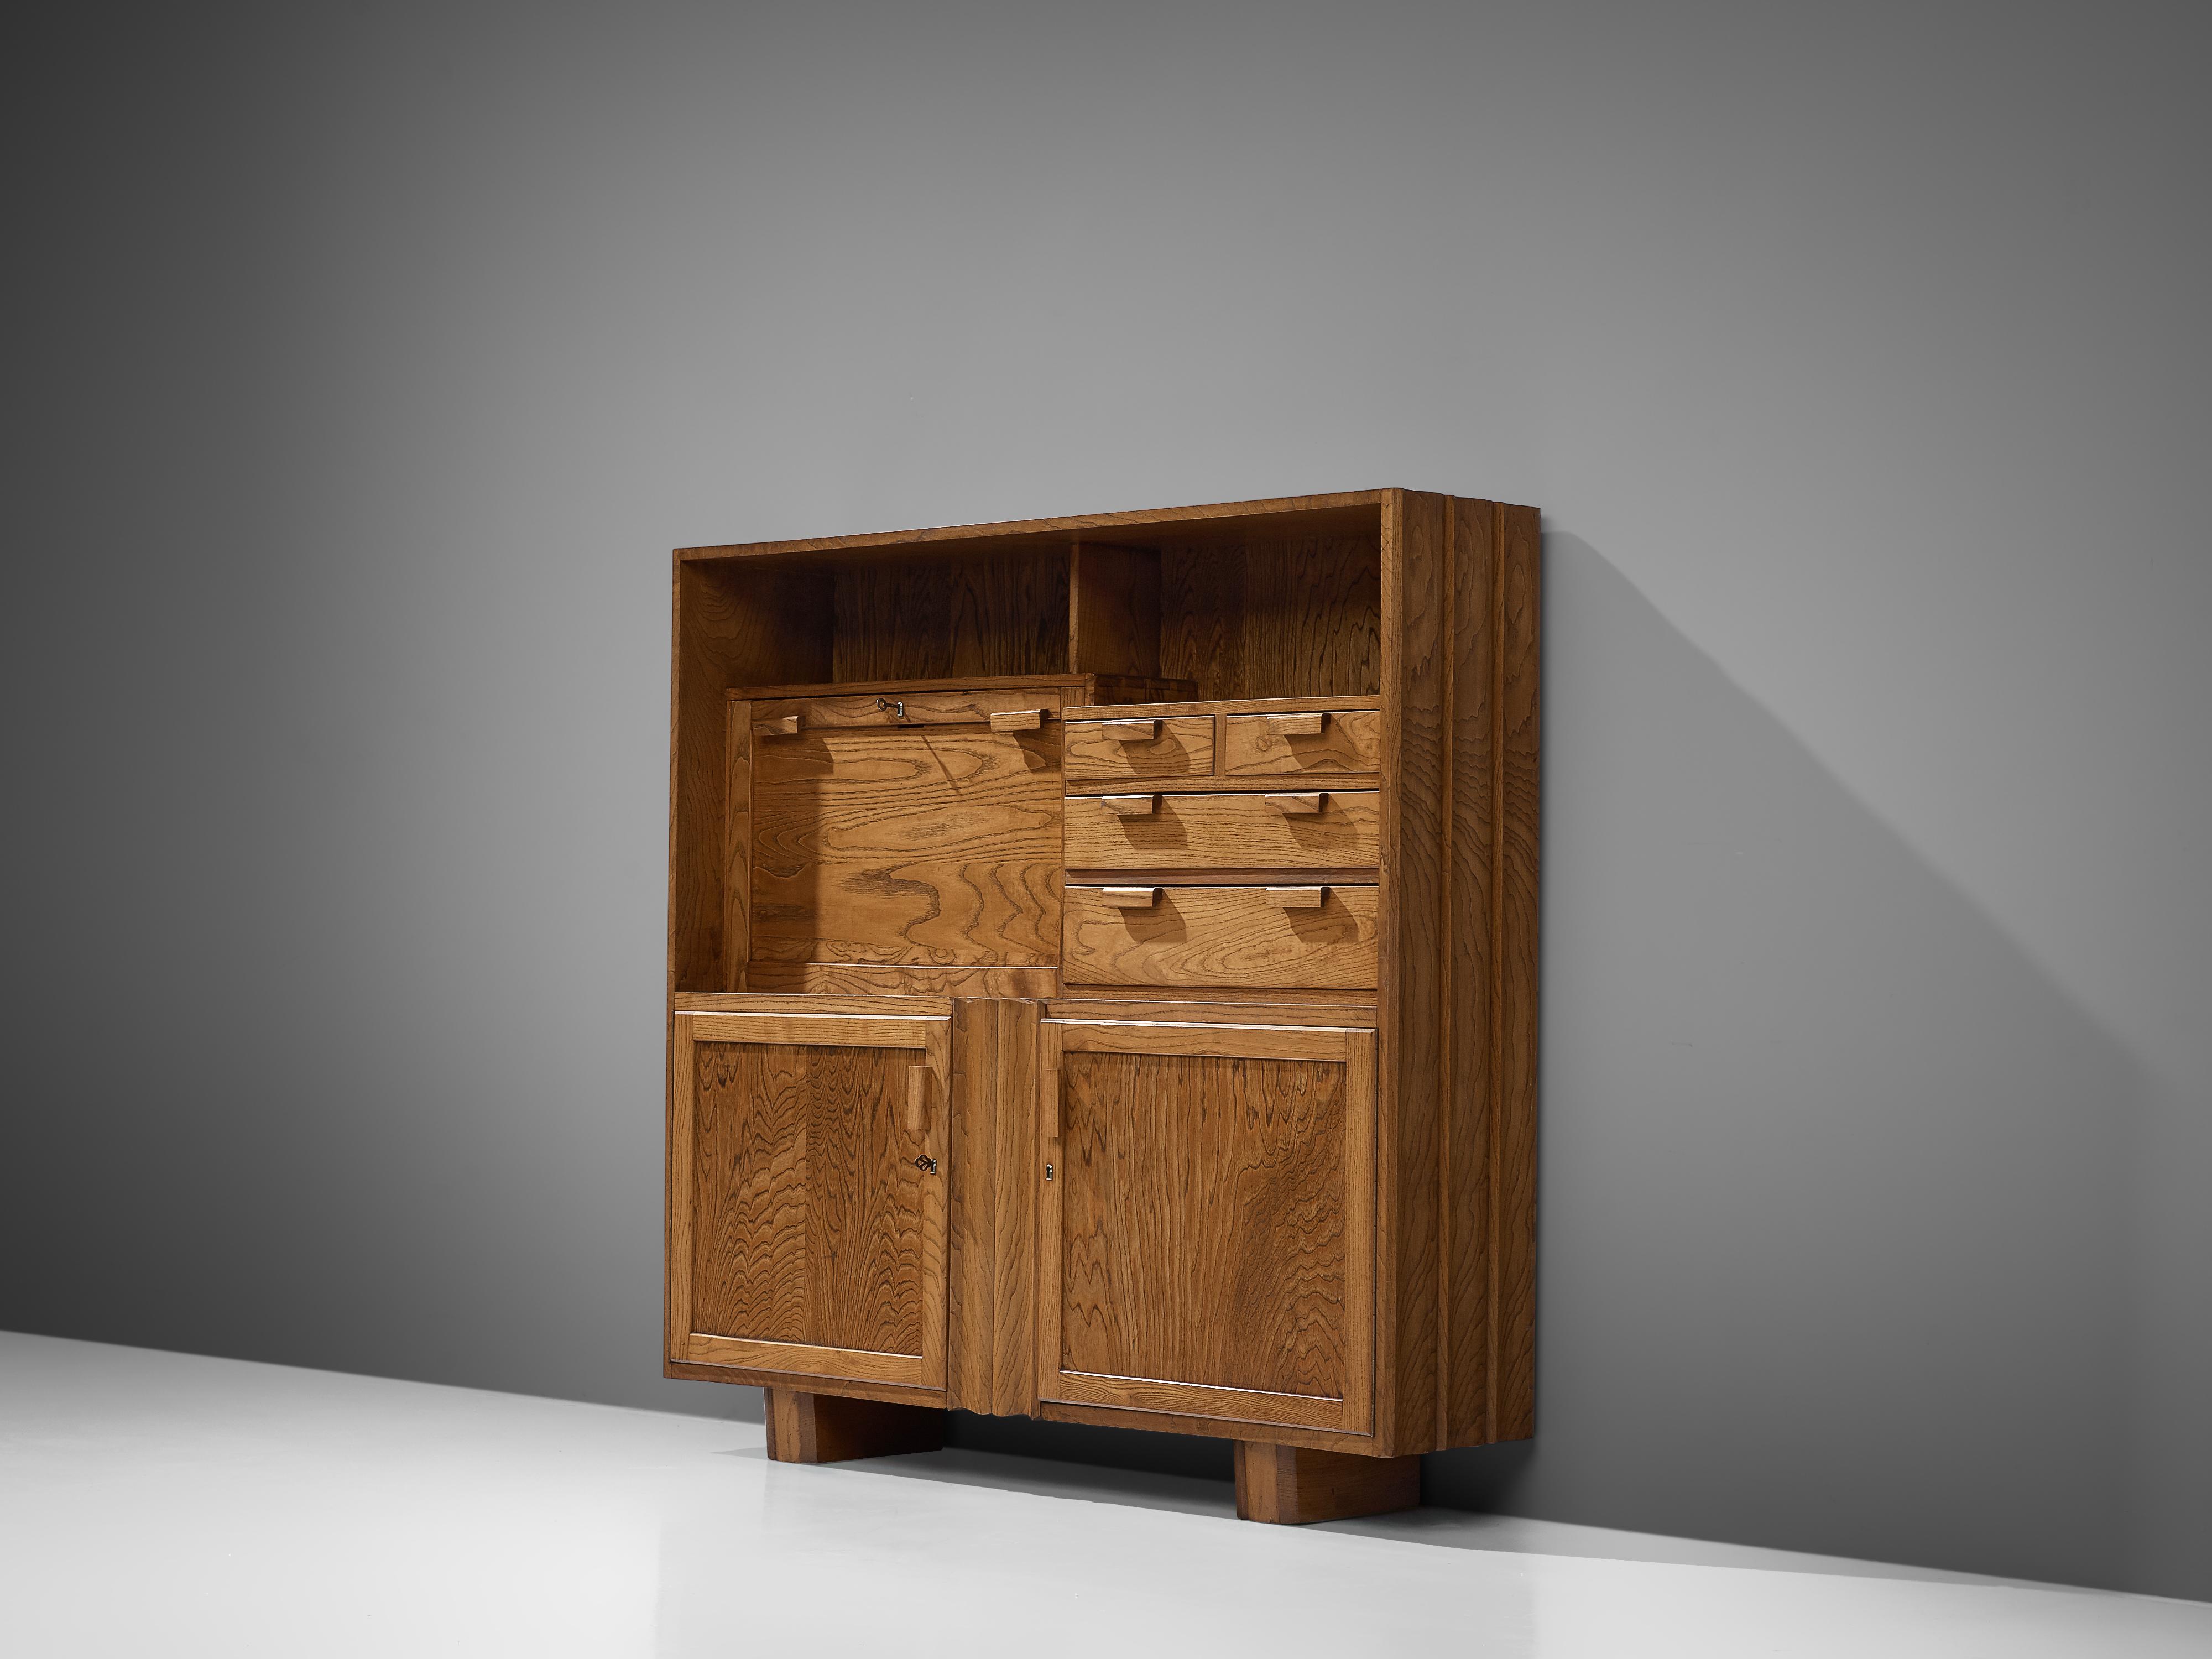 Cubic cabinet with writing table, ash, France, 1960s

A French cabinet completely executed in ash wood with dynamic grain and lovely wooden joints. The cabinet features several storage compartments: two doors on the bottom, two open shelves on top